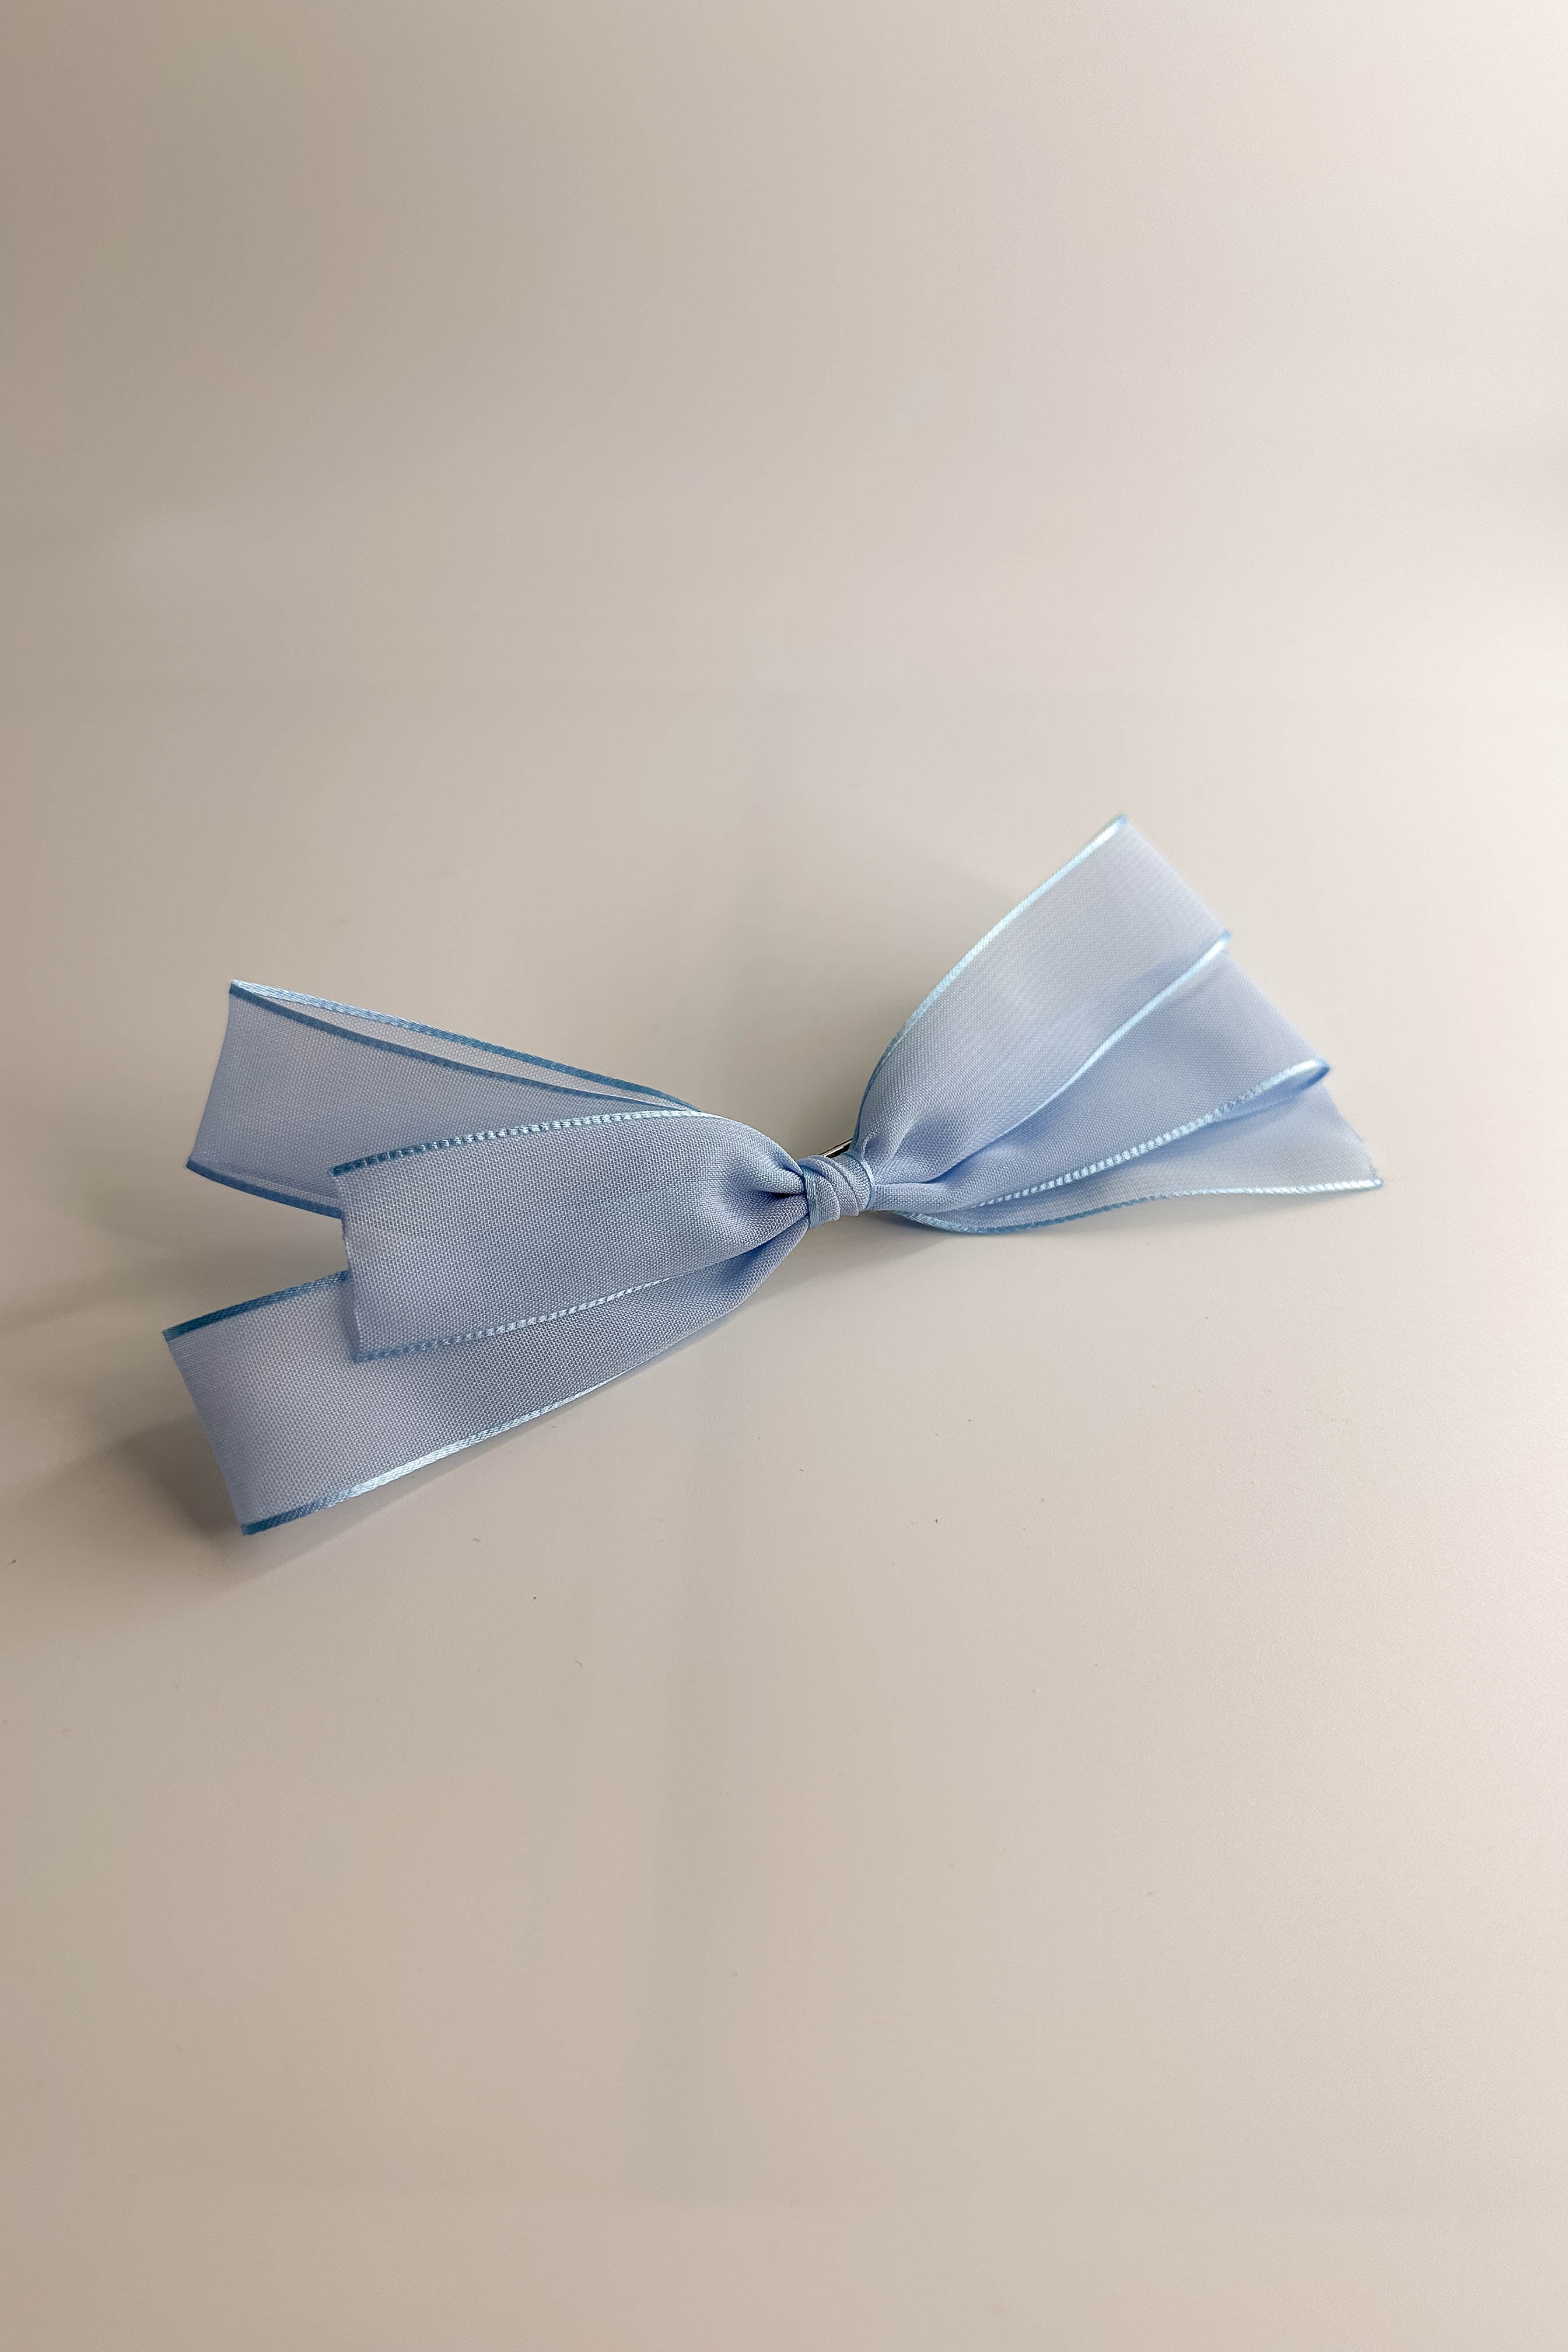 Flat lay view of the Amelia Sheer Hair Bow Barrette in Light Blue which features light blue sheer fabric, light blue satin trim, double bow with a french barrette clip.